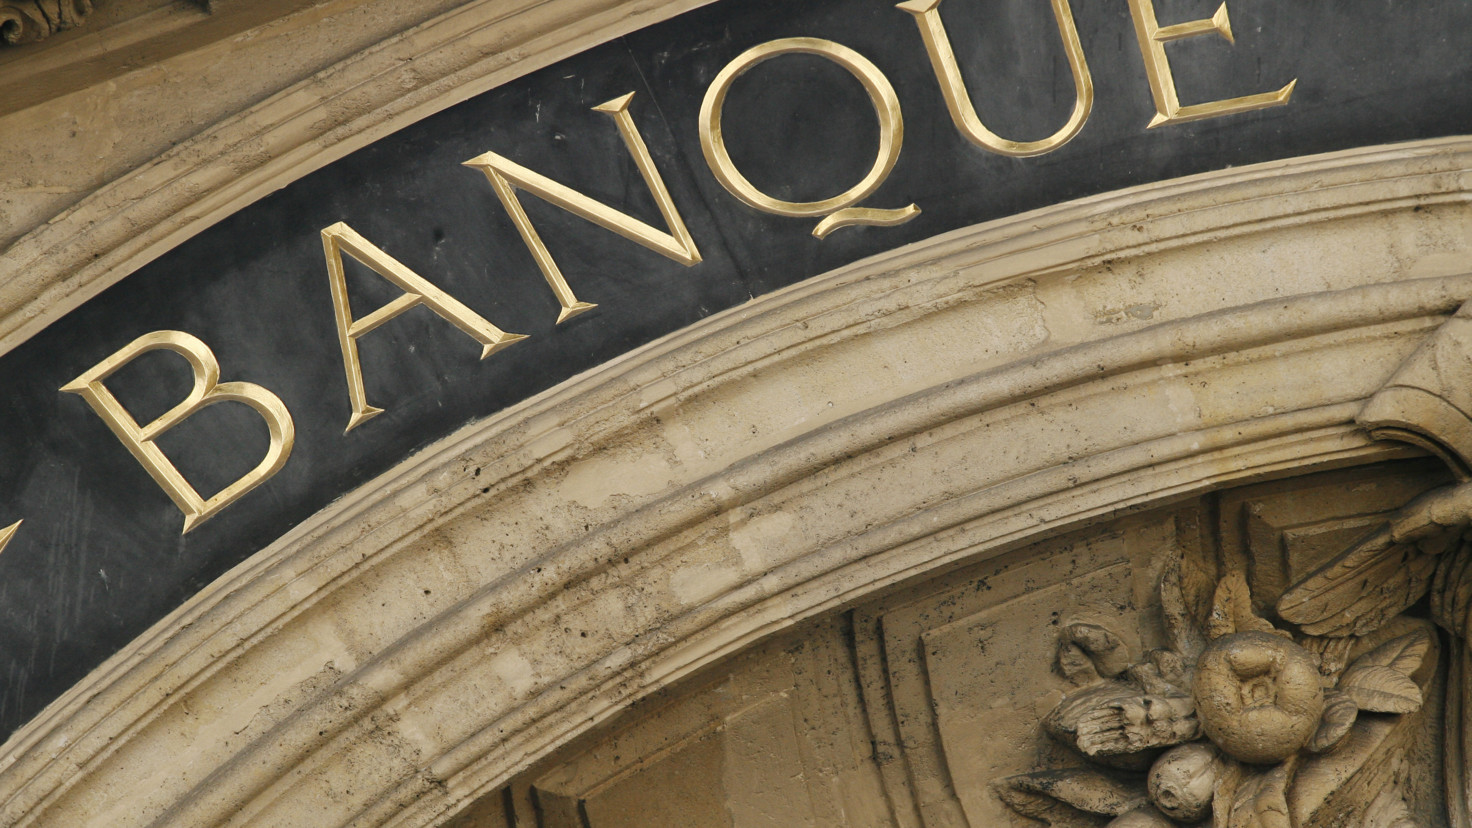 French central bank proposes further digital currency experiments